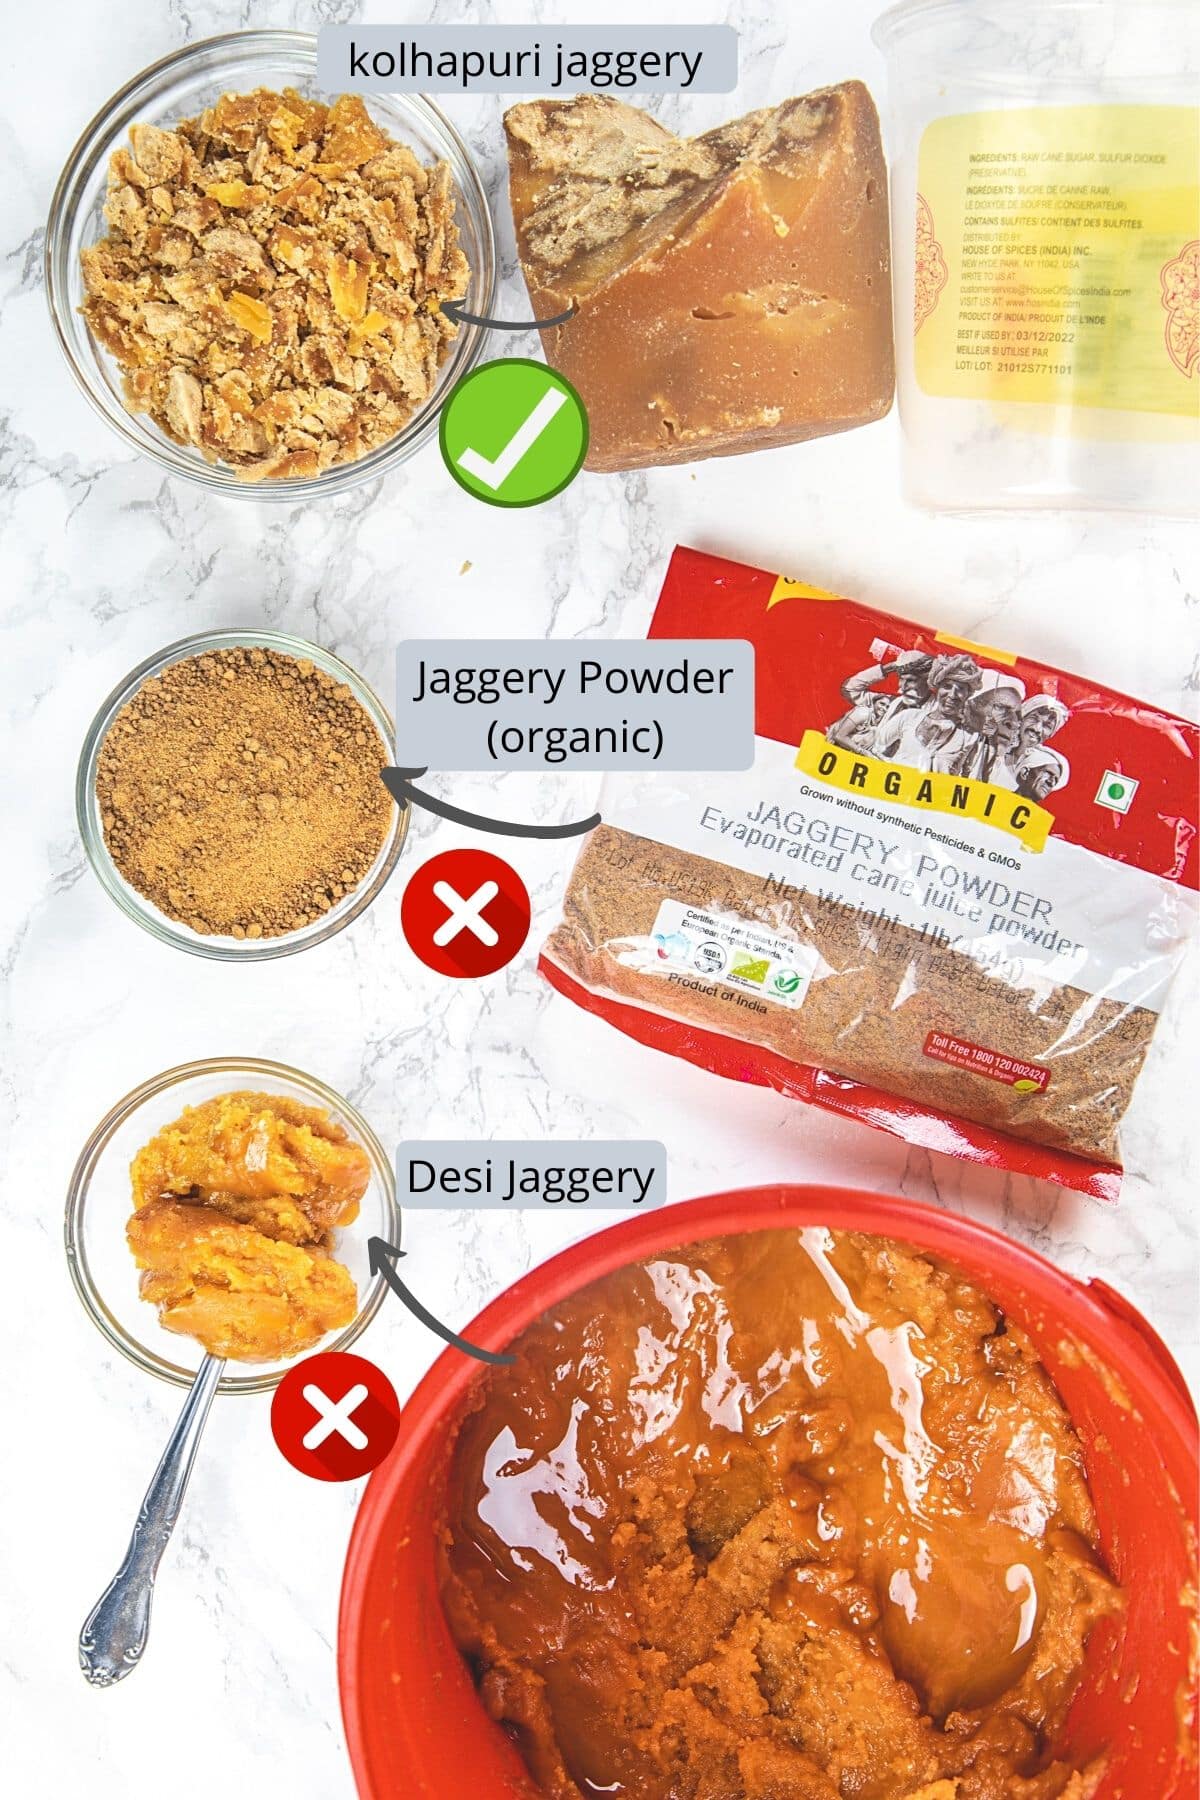 Image of three different types of jaggery.